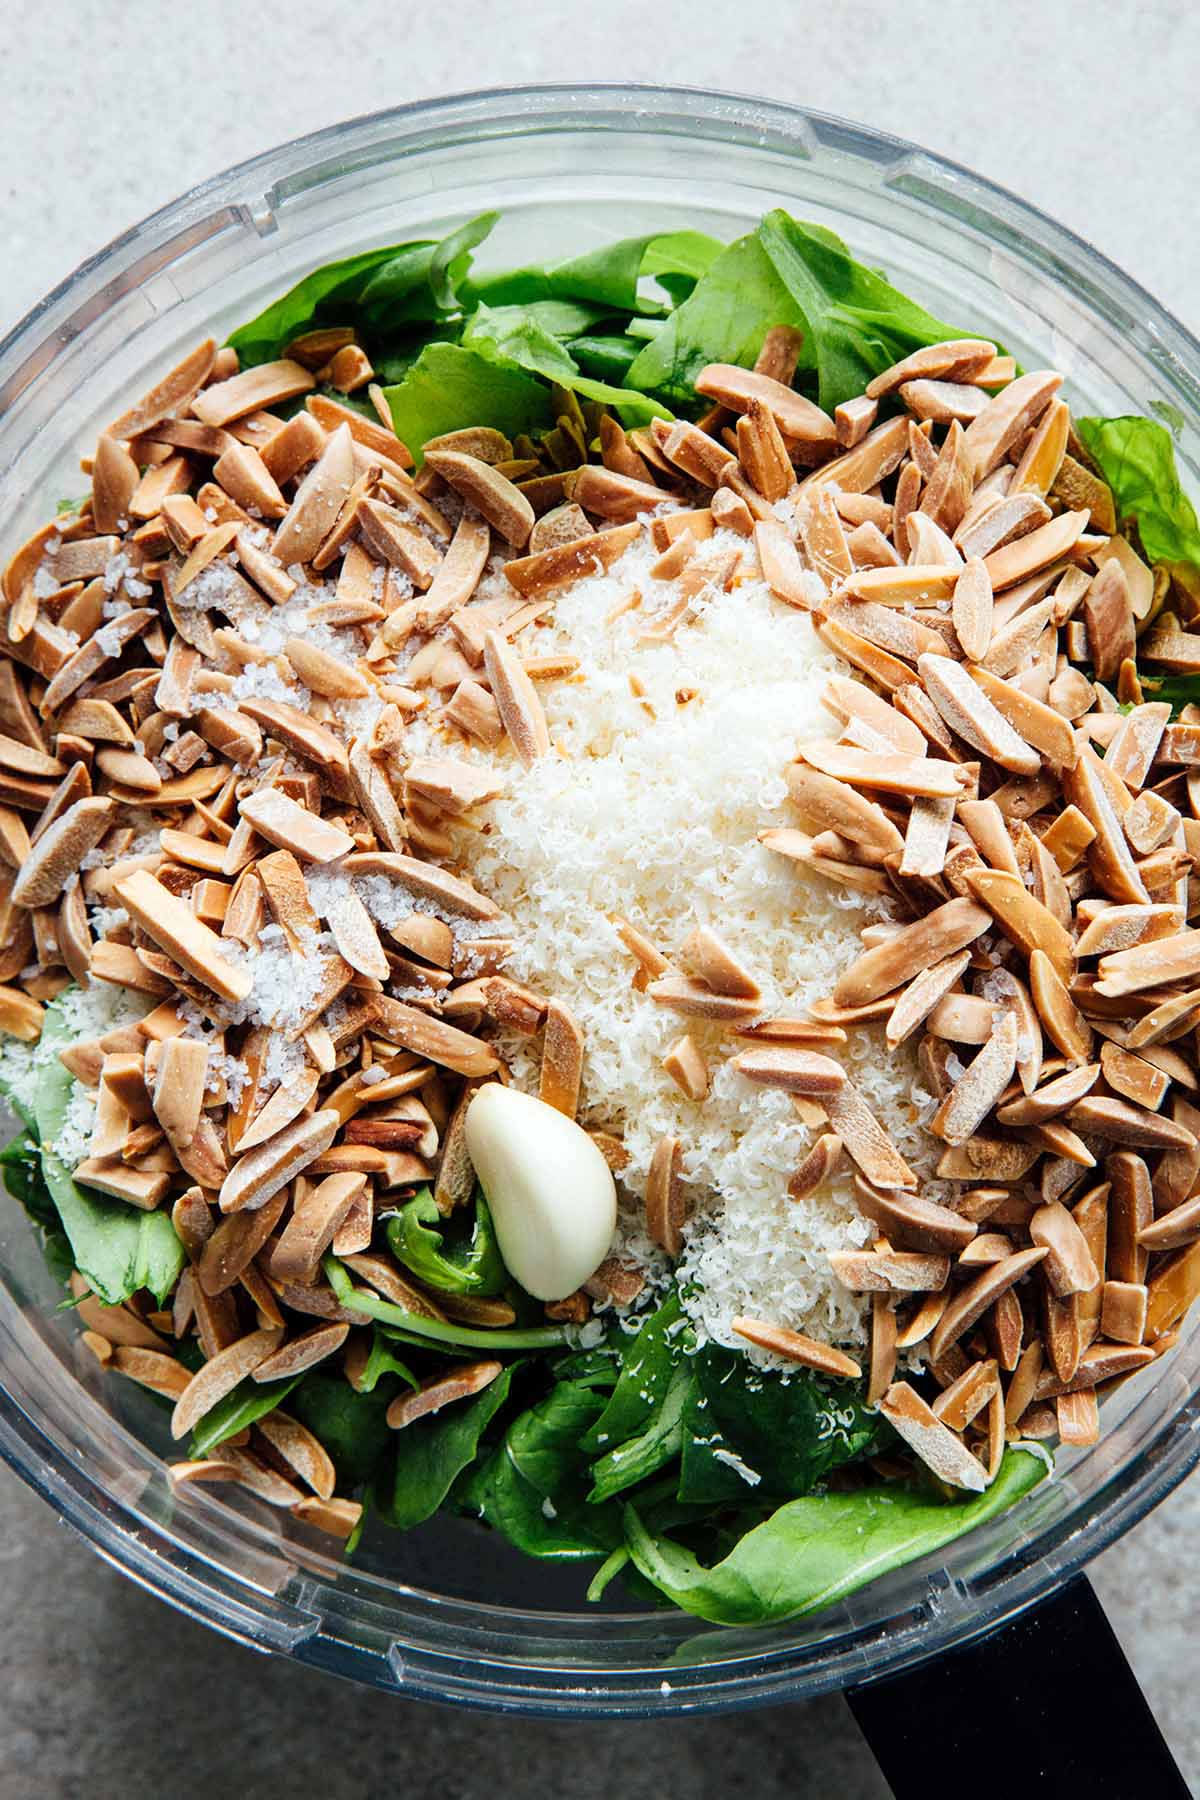 The bowl of a food processor filled with fresh spinach and arugula, Parmesan cheese, toasted slivered almonds, flaky salt, and one clove of peeled garlic.